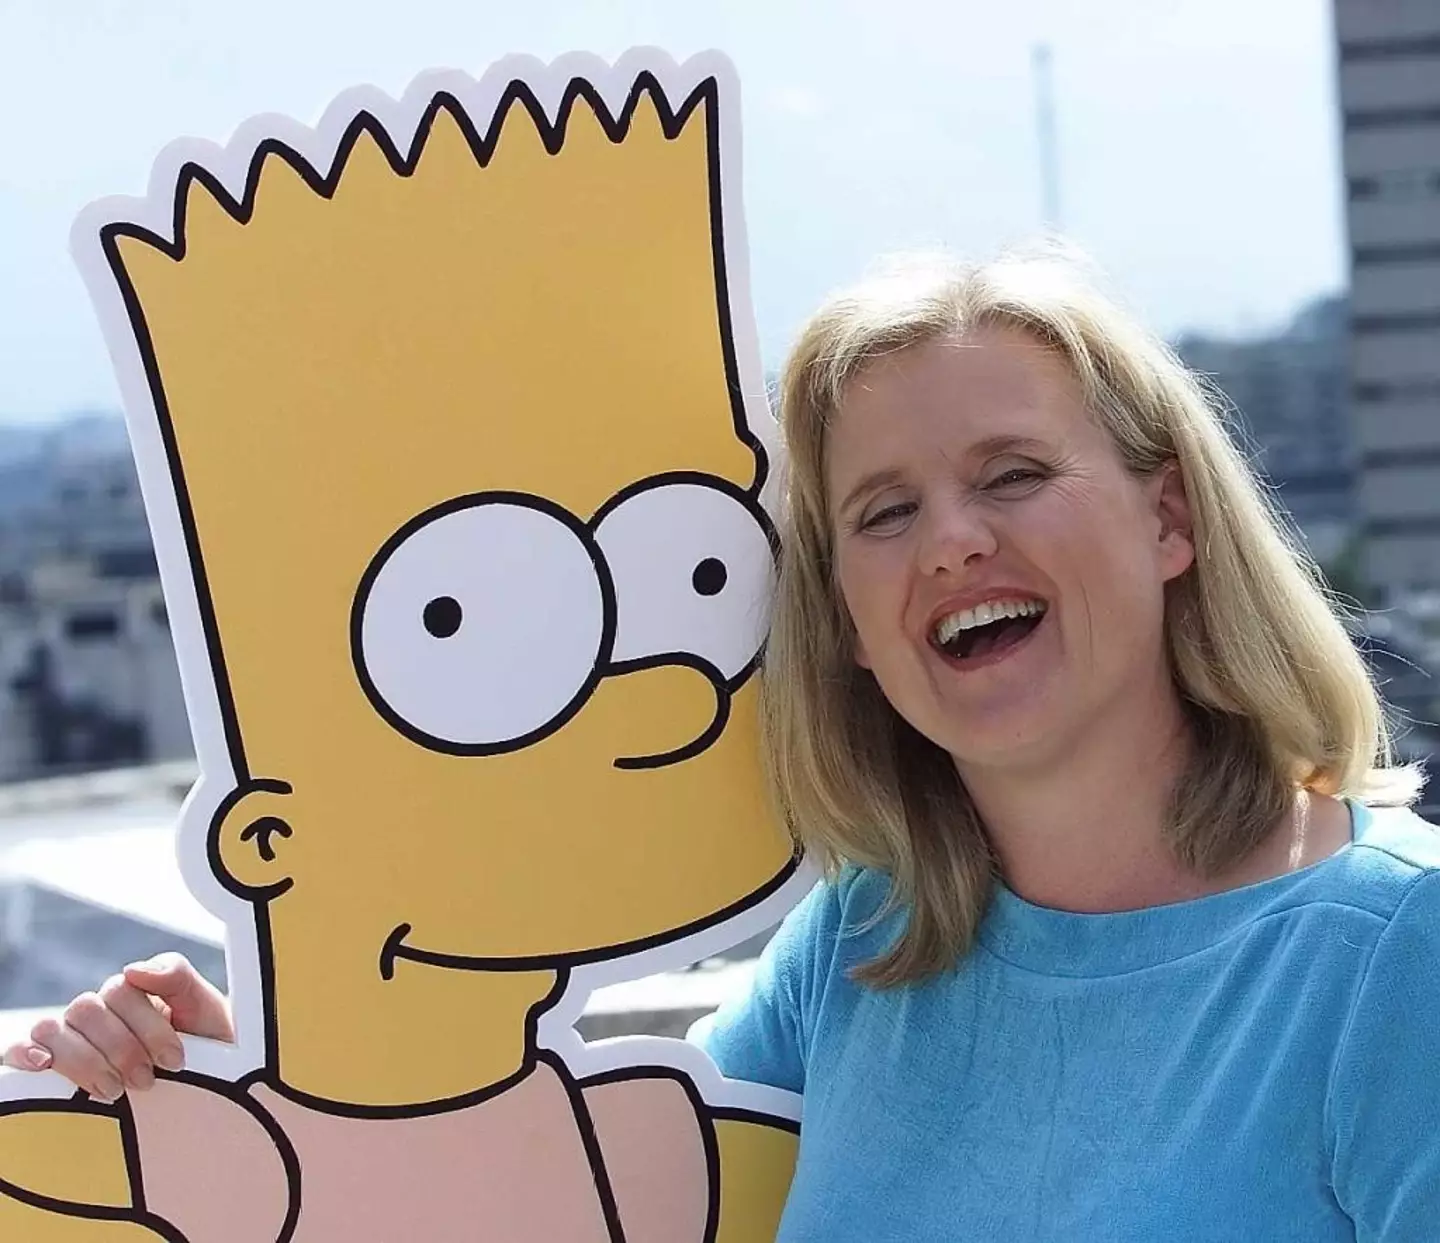 Nancy is the voice of Bart Simpson, and has voiced the character since the 1990s. (Colin Davey/Getty Images)